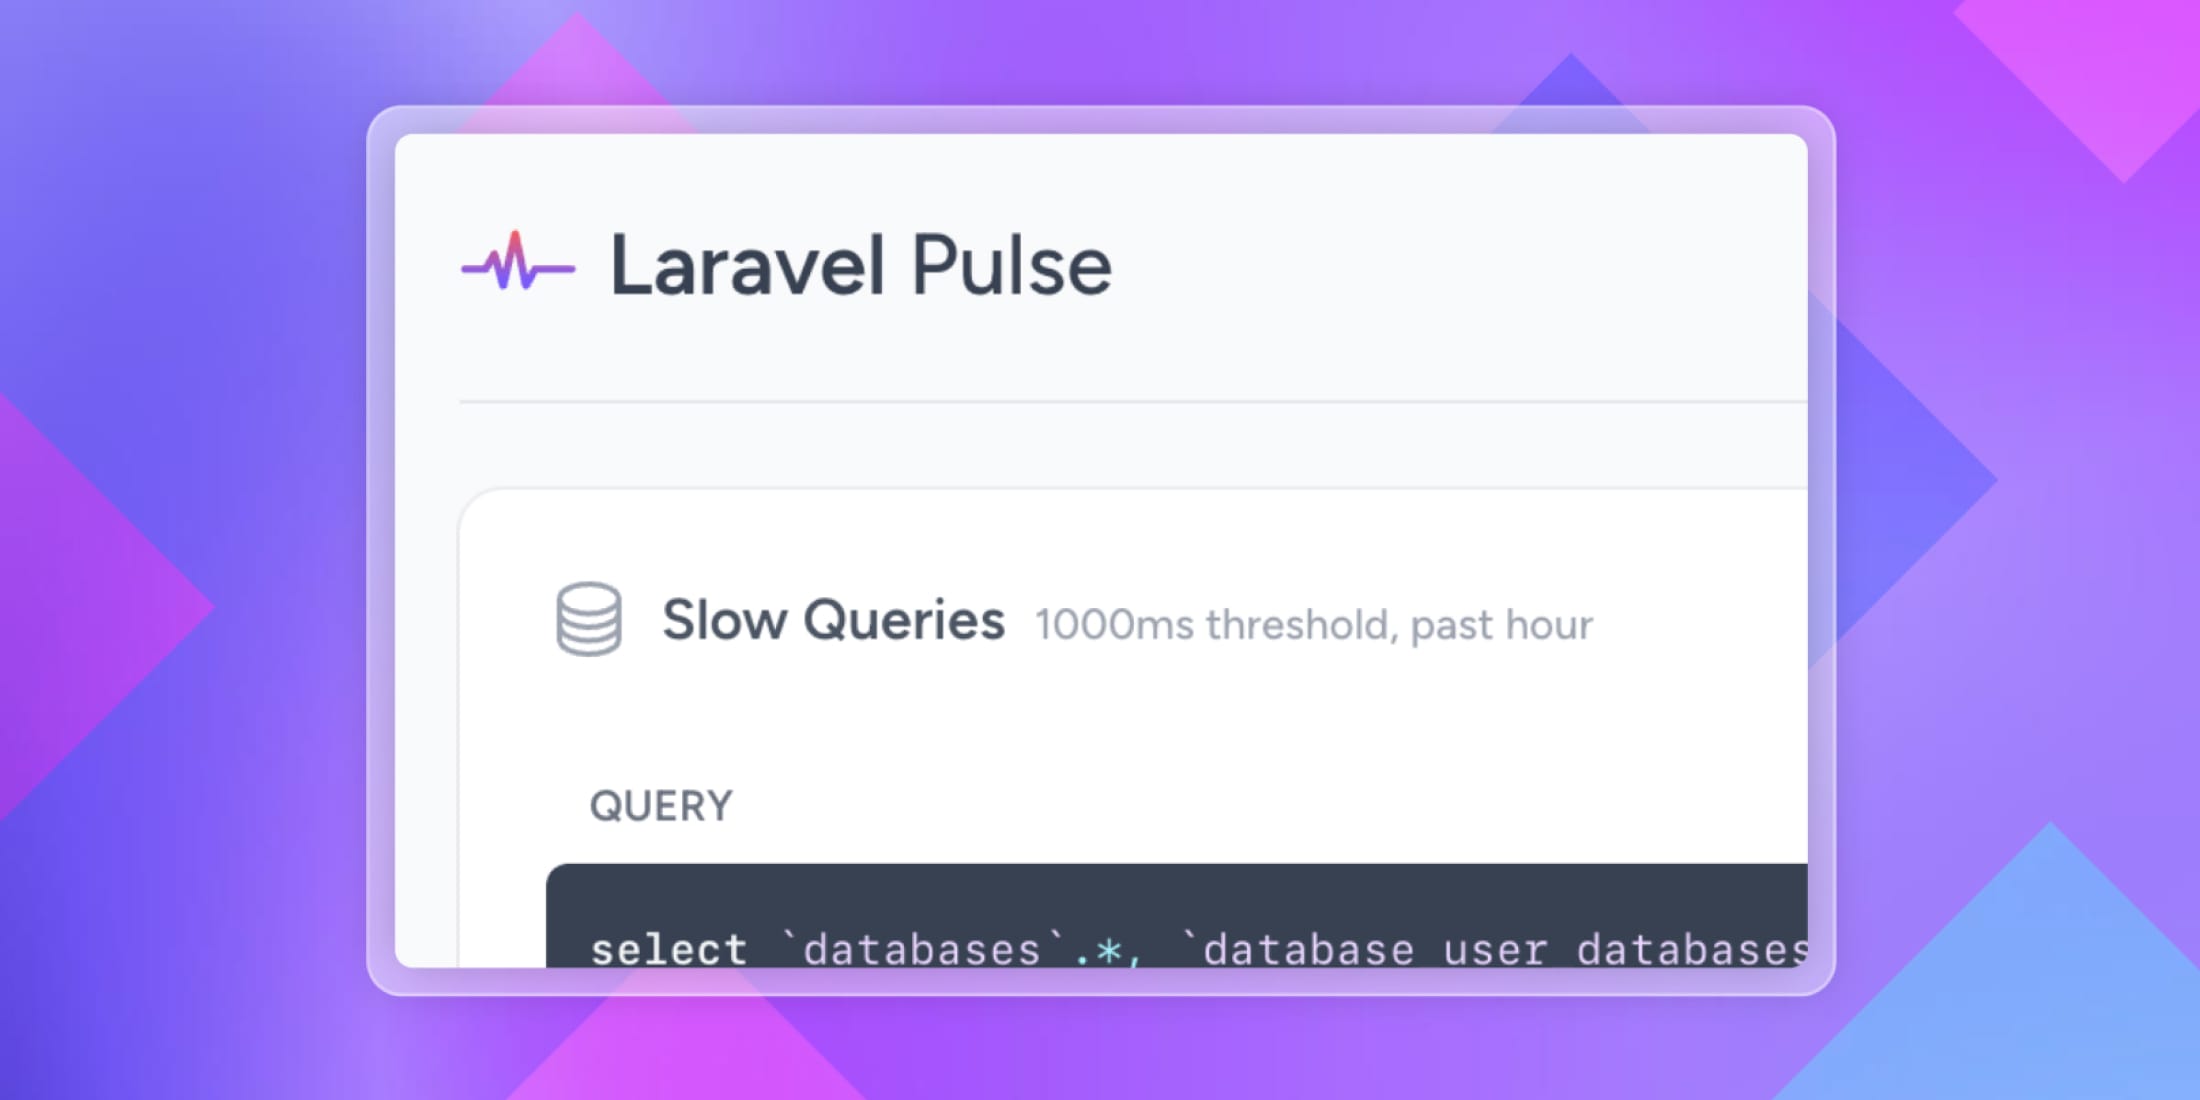 Laravel Pulse is a health and performance monitoring tool for your Laravel applications